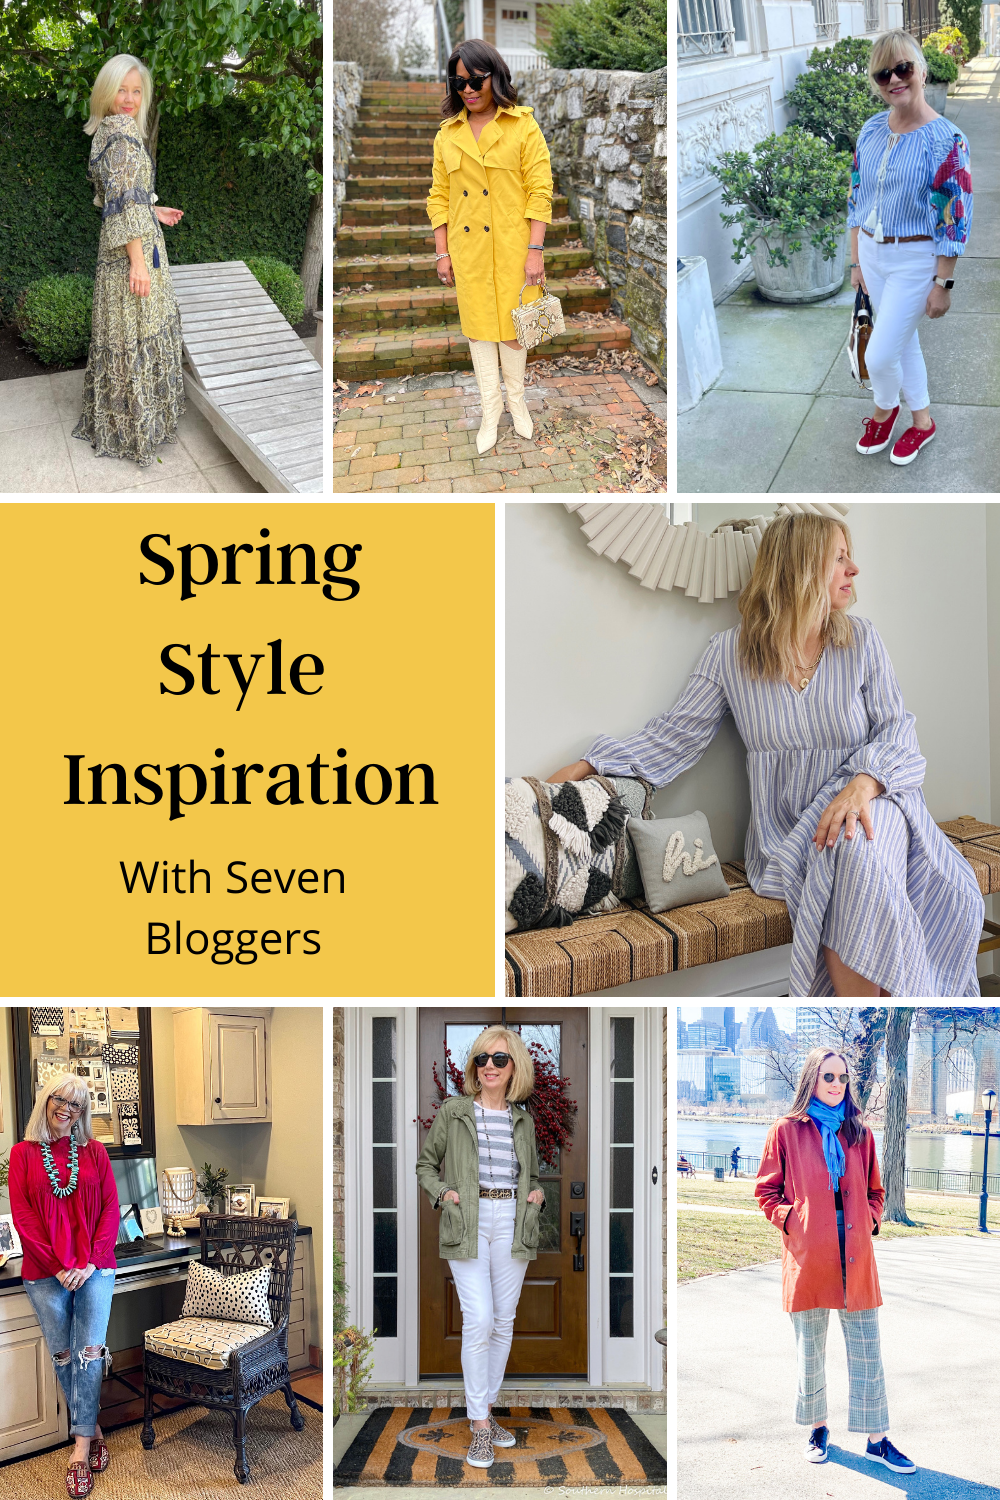 Spring Style Inspiration with Seven Bloggers all over the age of 50